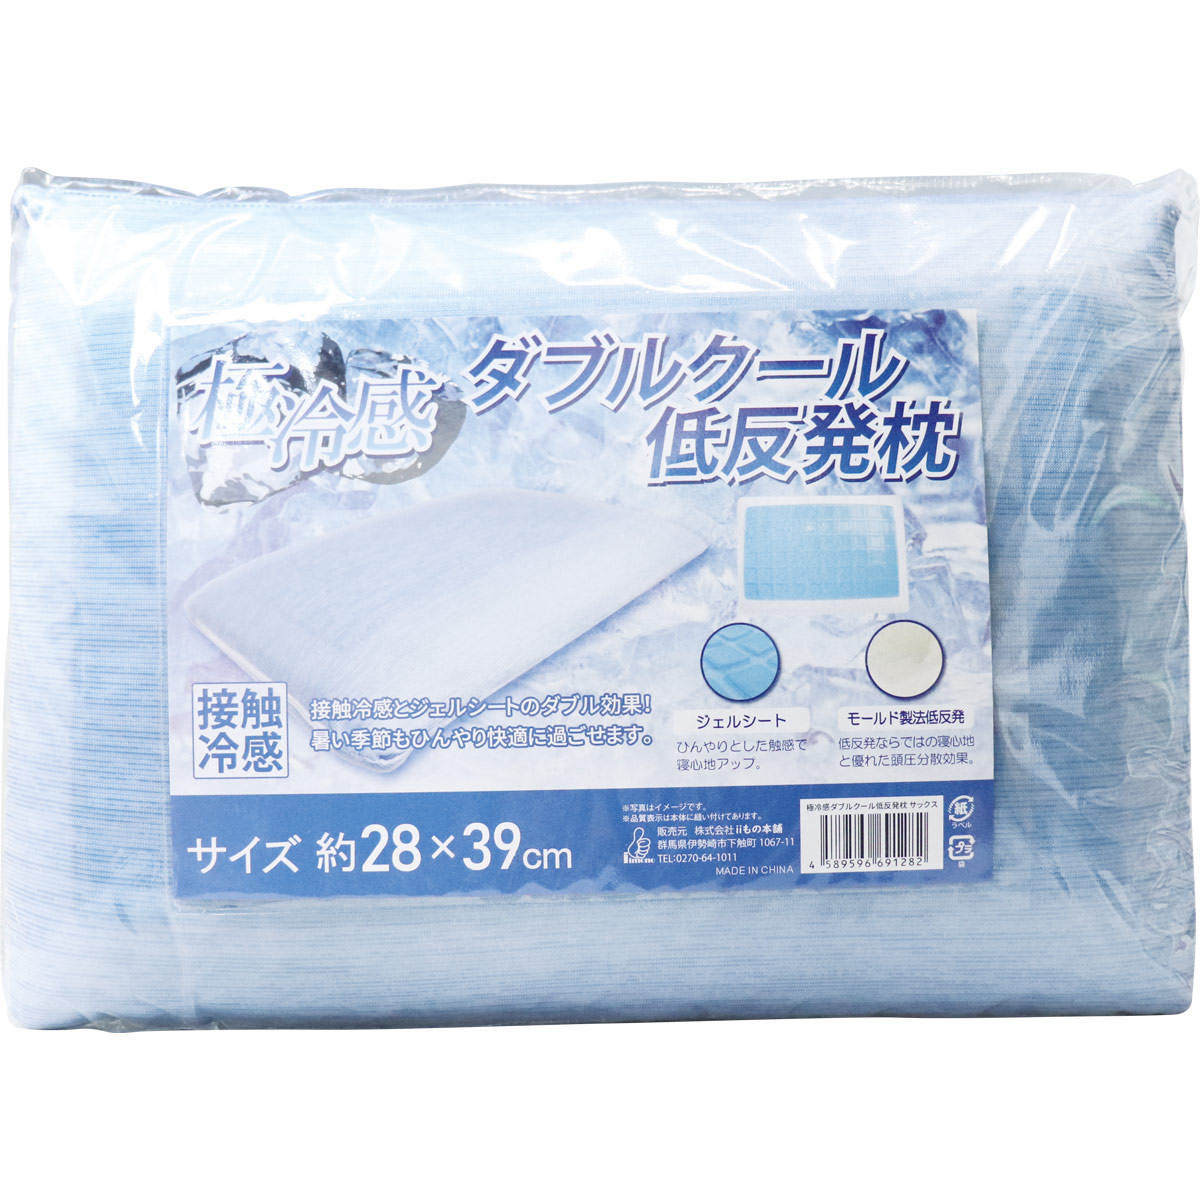 Picture of Saxe Blue color Cool Touch Fabric Cooling Memory Foam Pillow